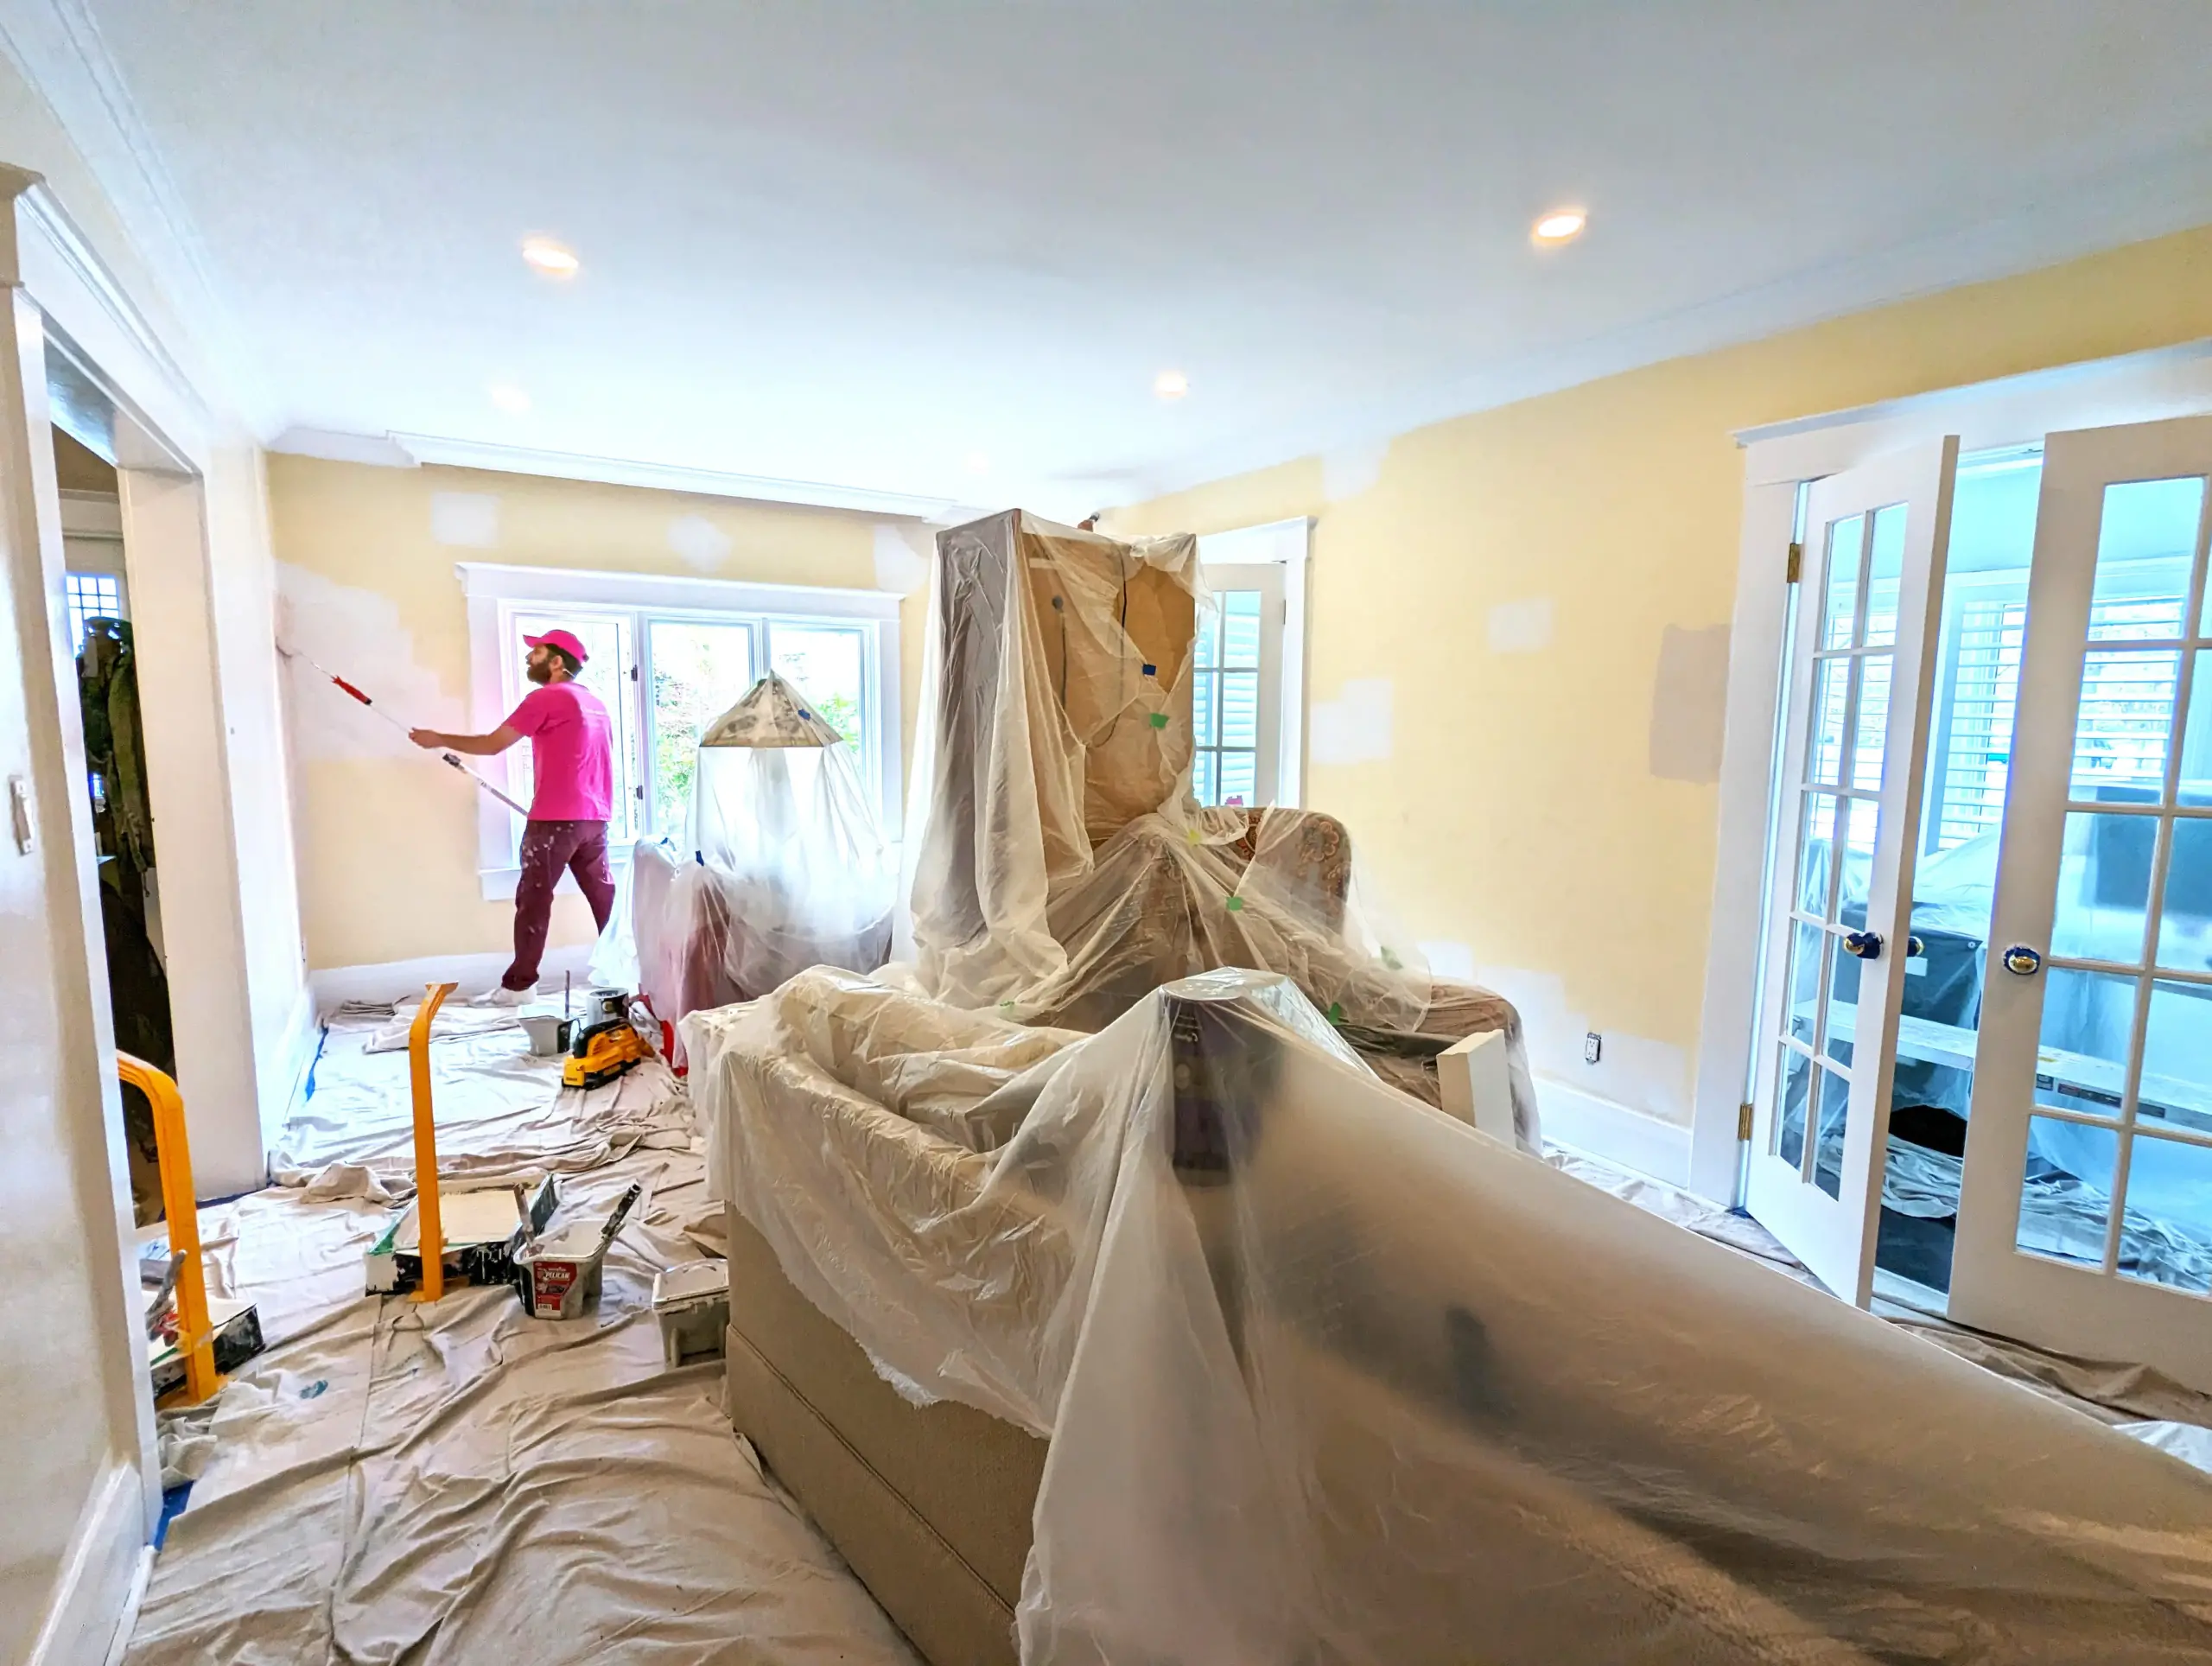 Interior painting contractor working on a full house painting project in Leaside with full furniture